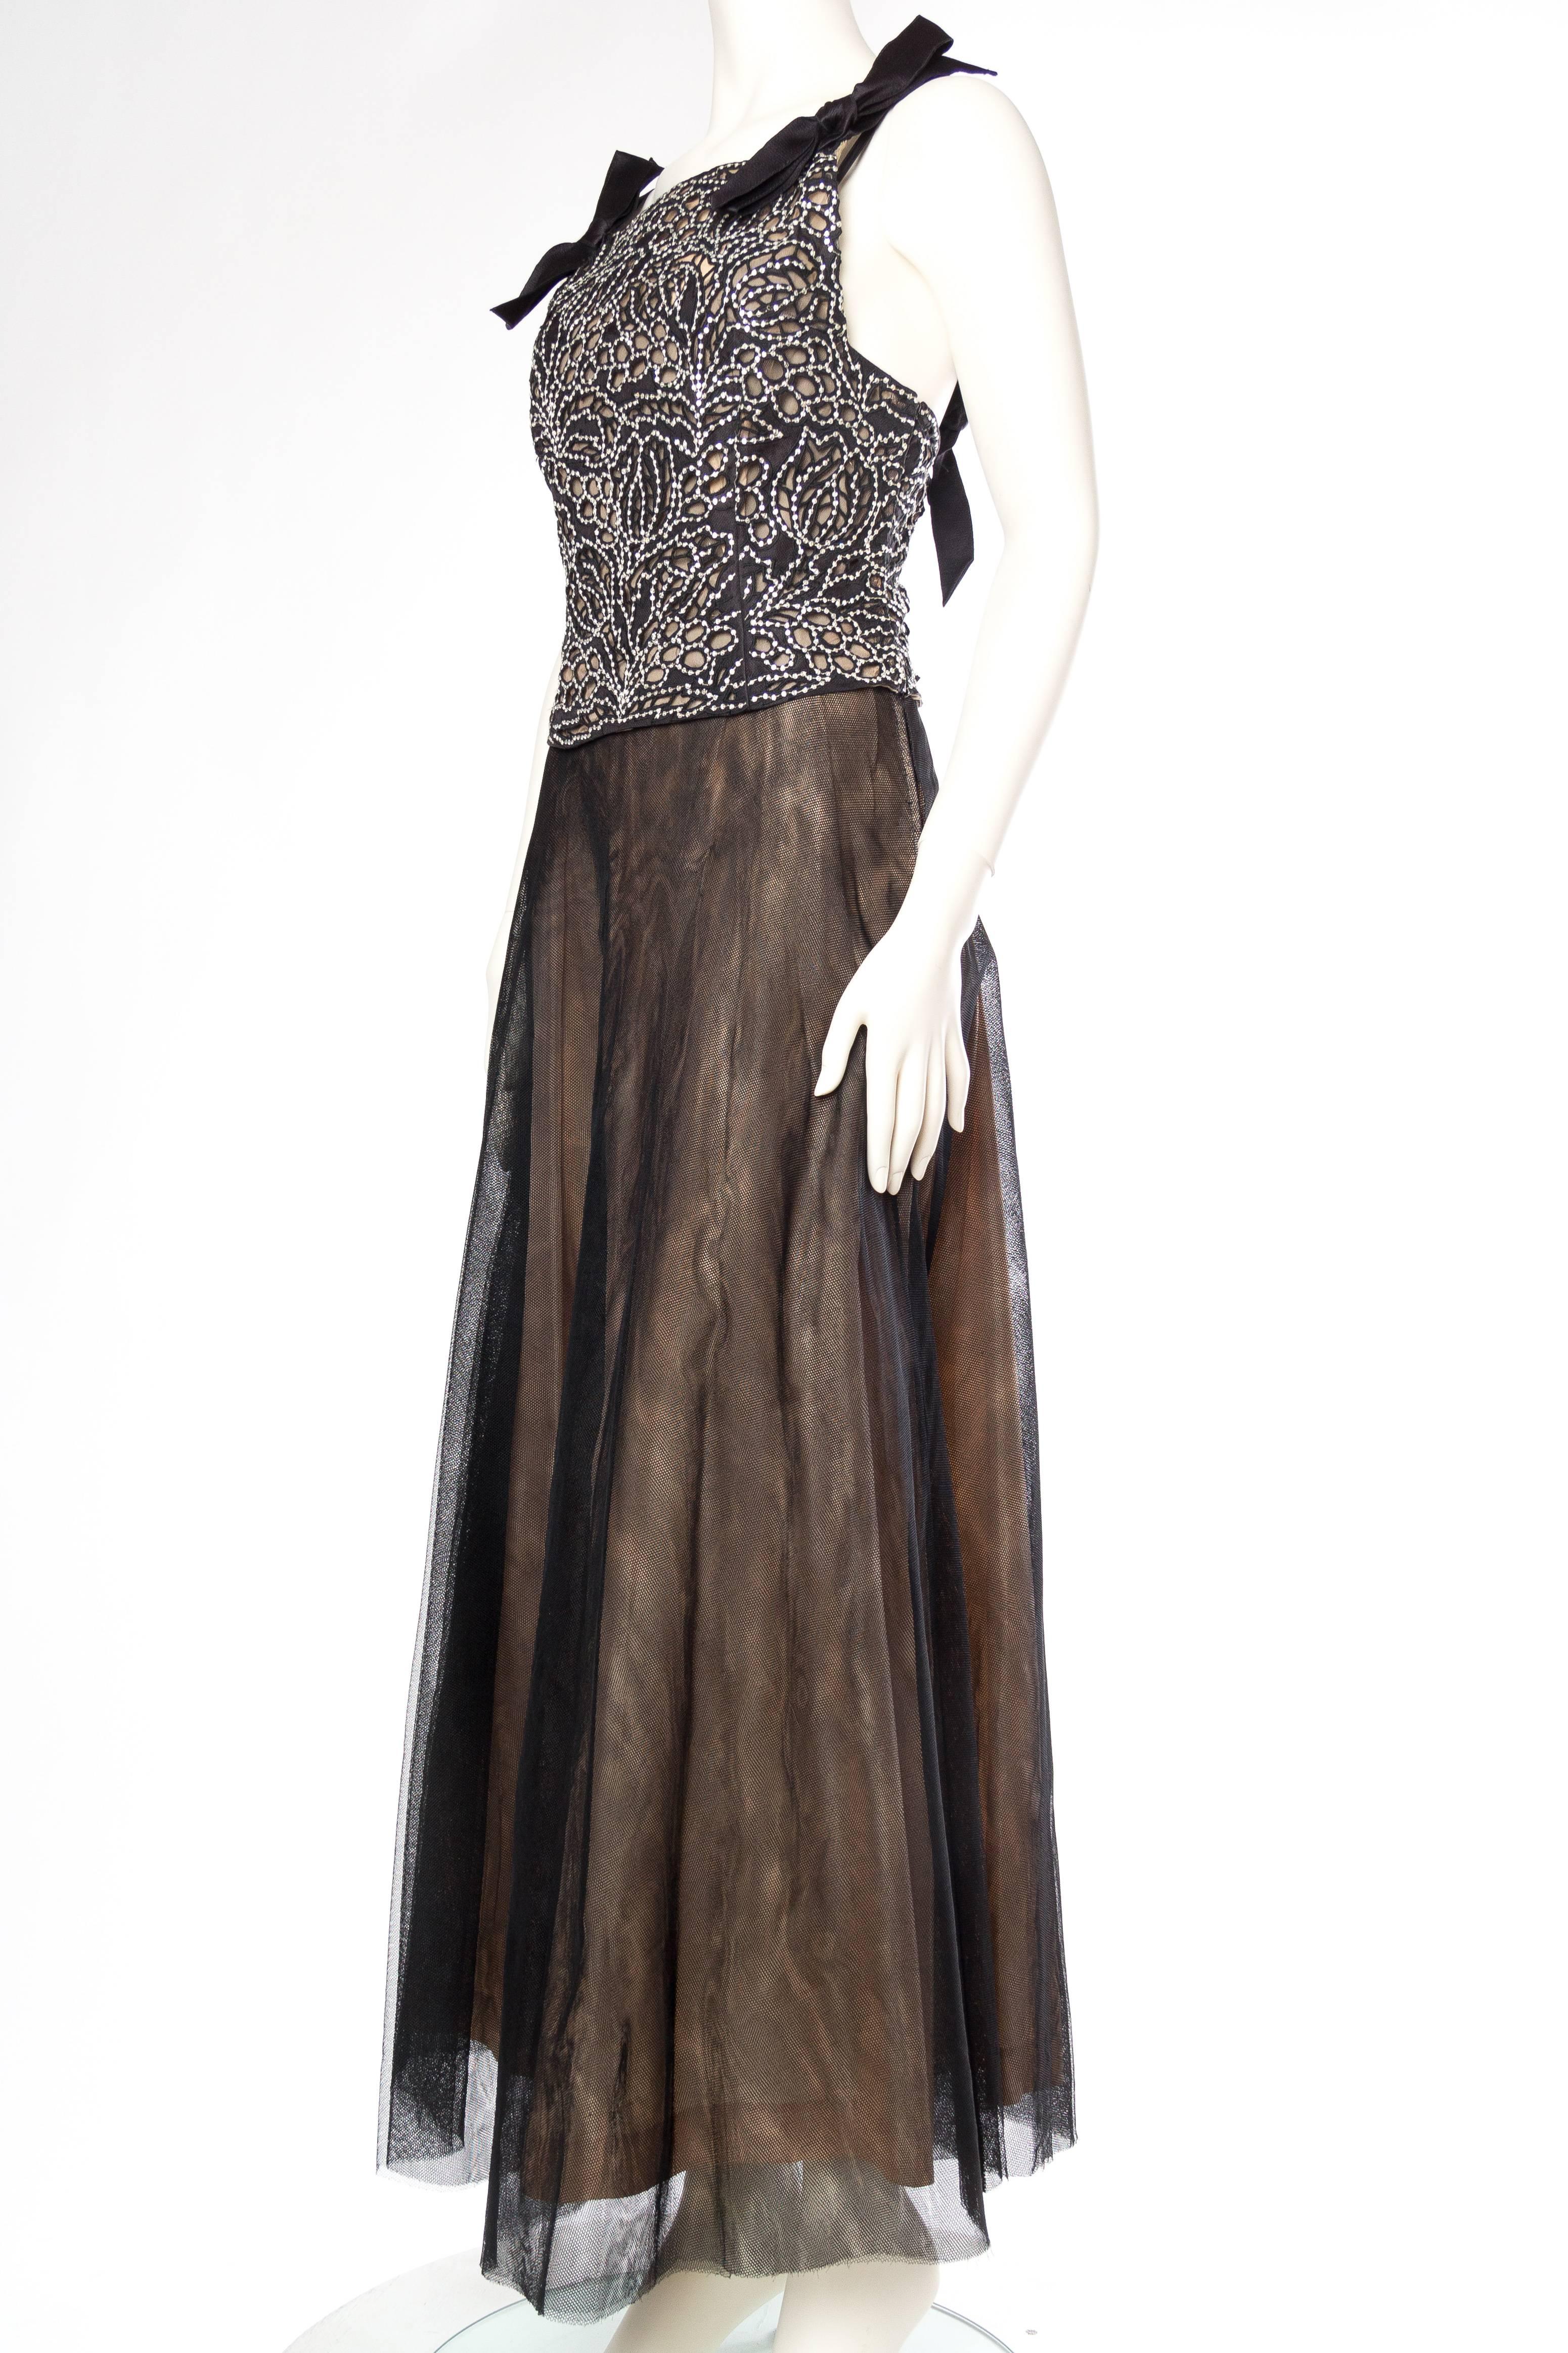 1980 VALENTINO Black Silk Tulle Couture Quality Gown With Lace And Crystal Bodi For Sale 3